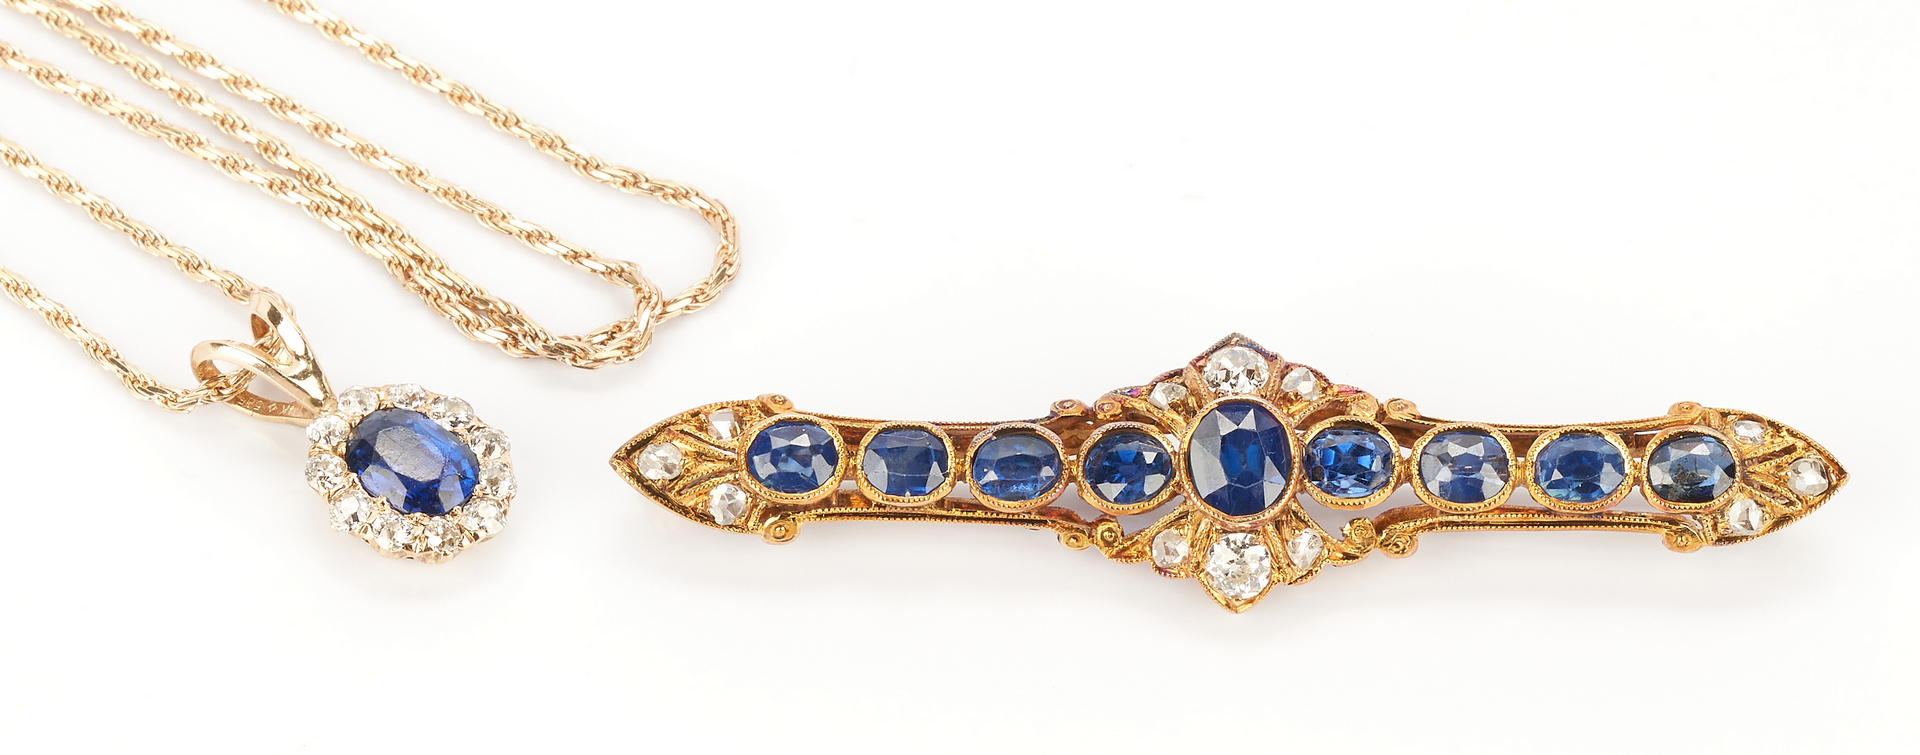 Lot 780: Ladies 14K Sapphire and Diamond Necklace and Pin